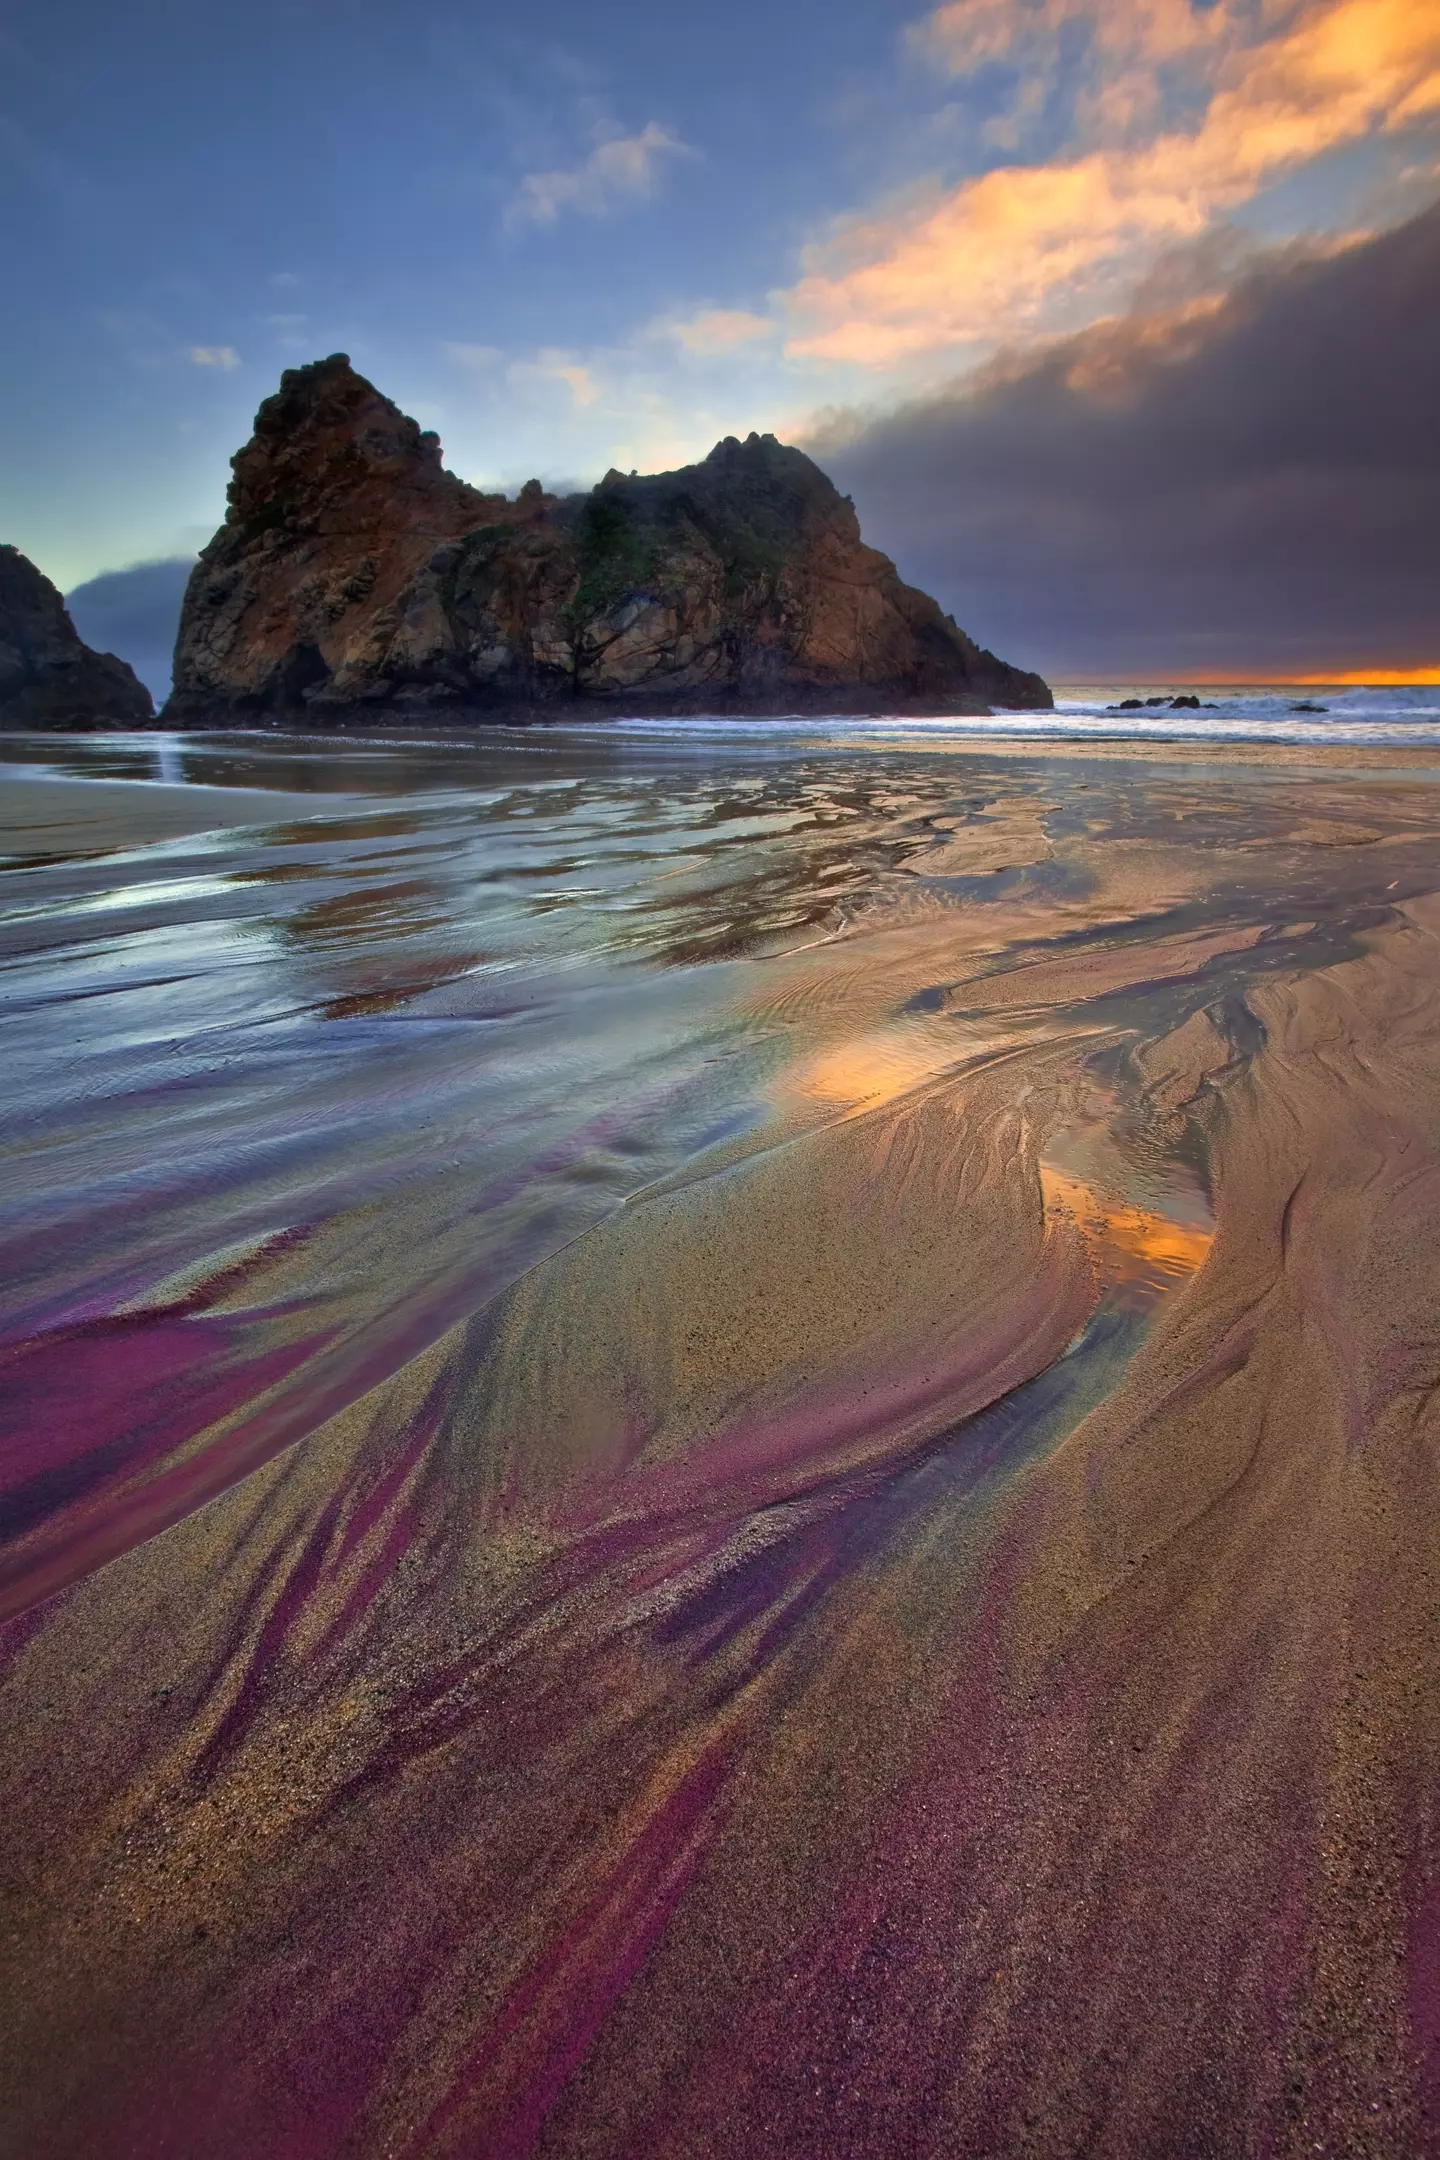 The sand changes color because of manganese garnet rocks.